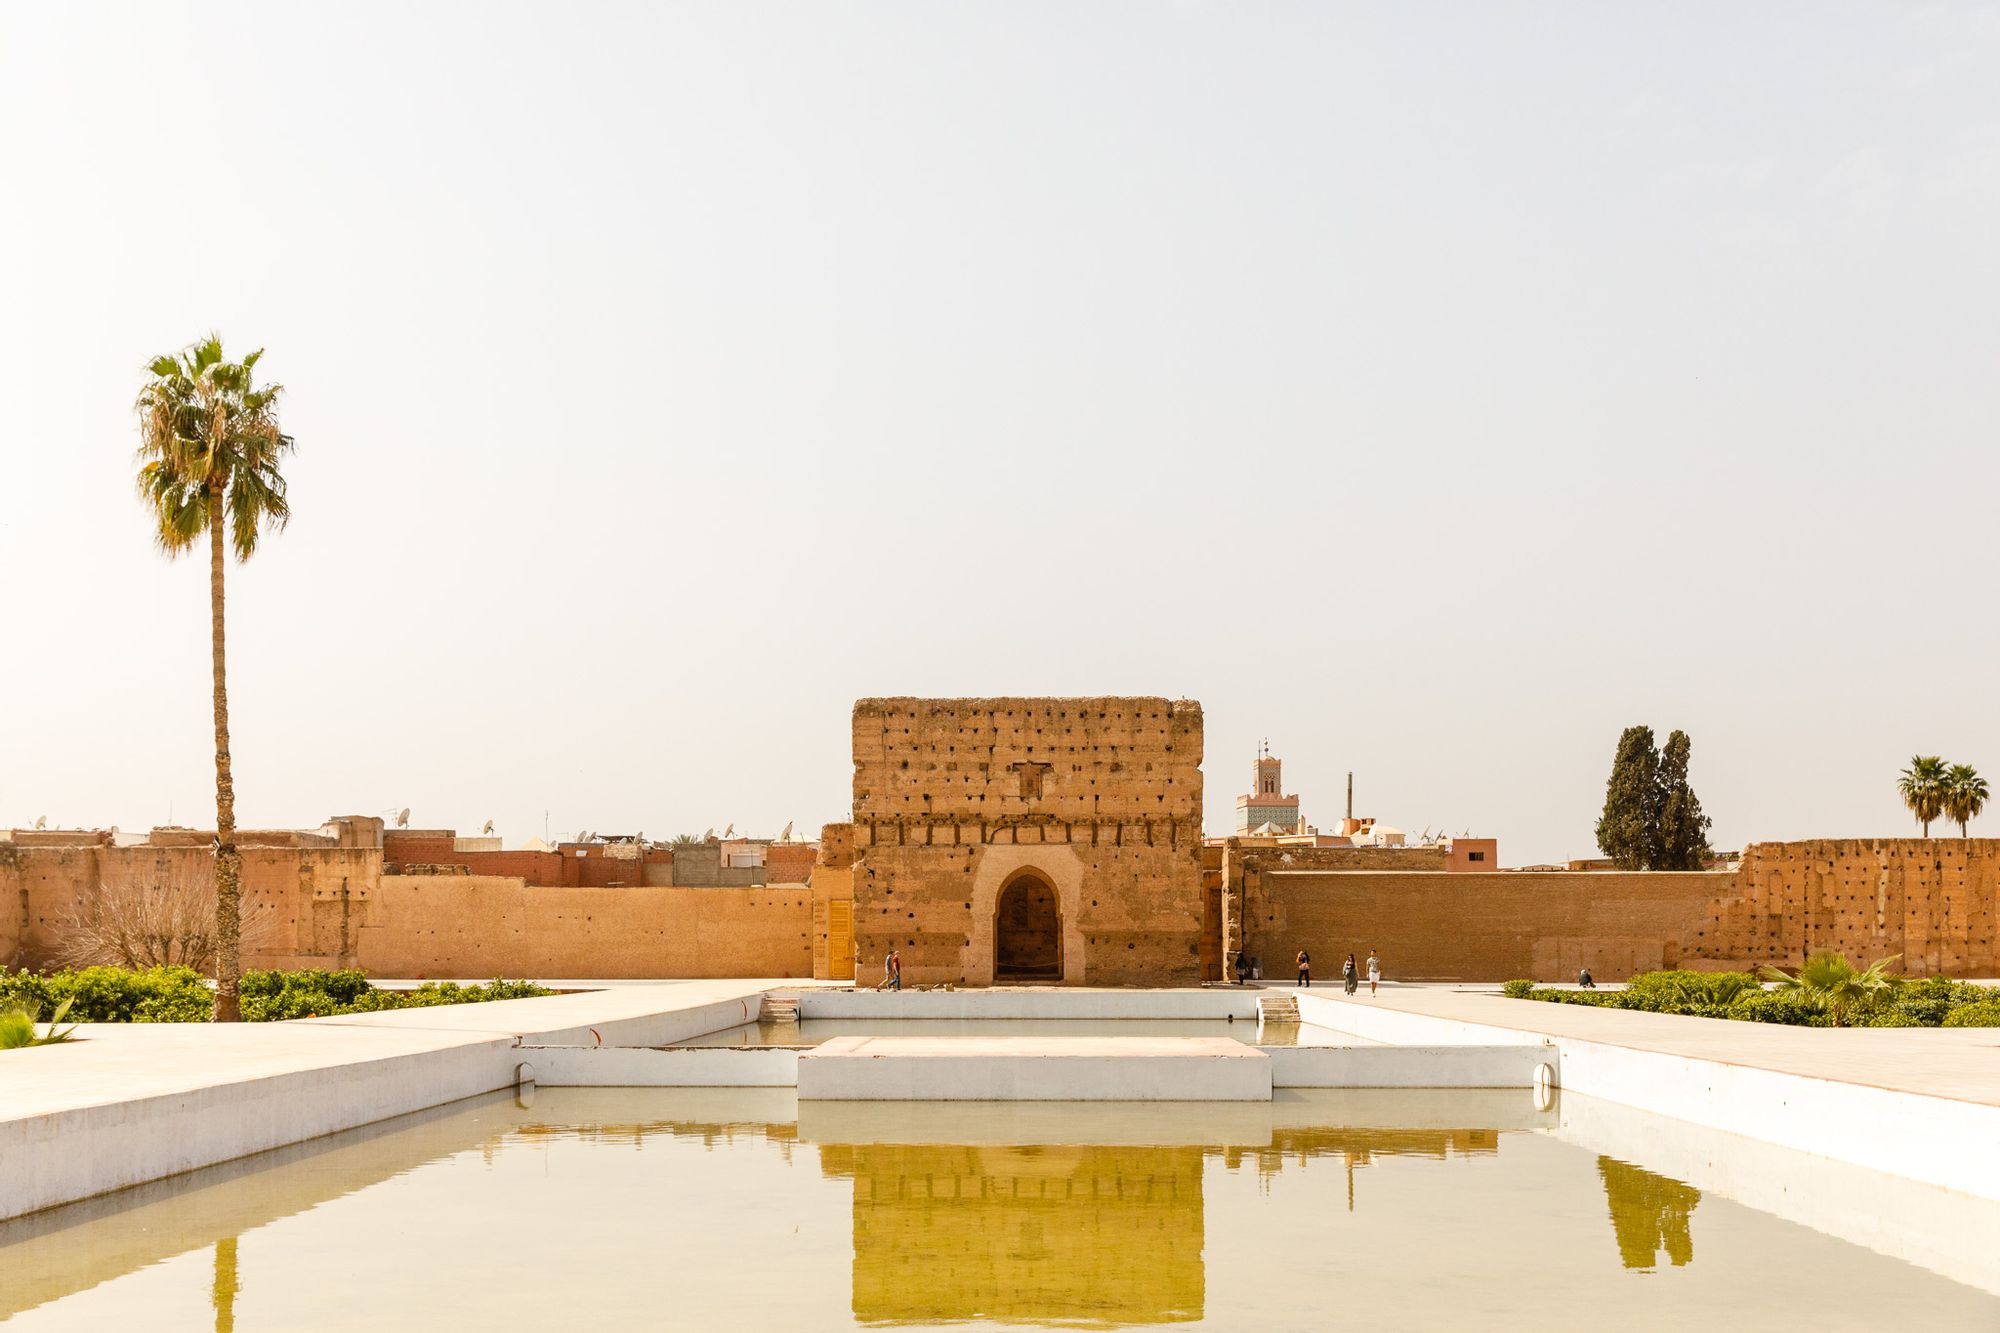 A fort at Imlil, Morocco